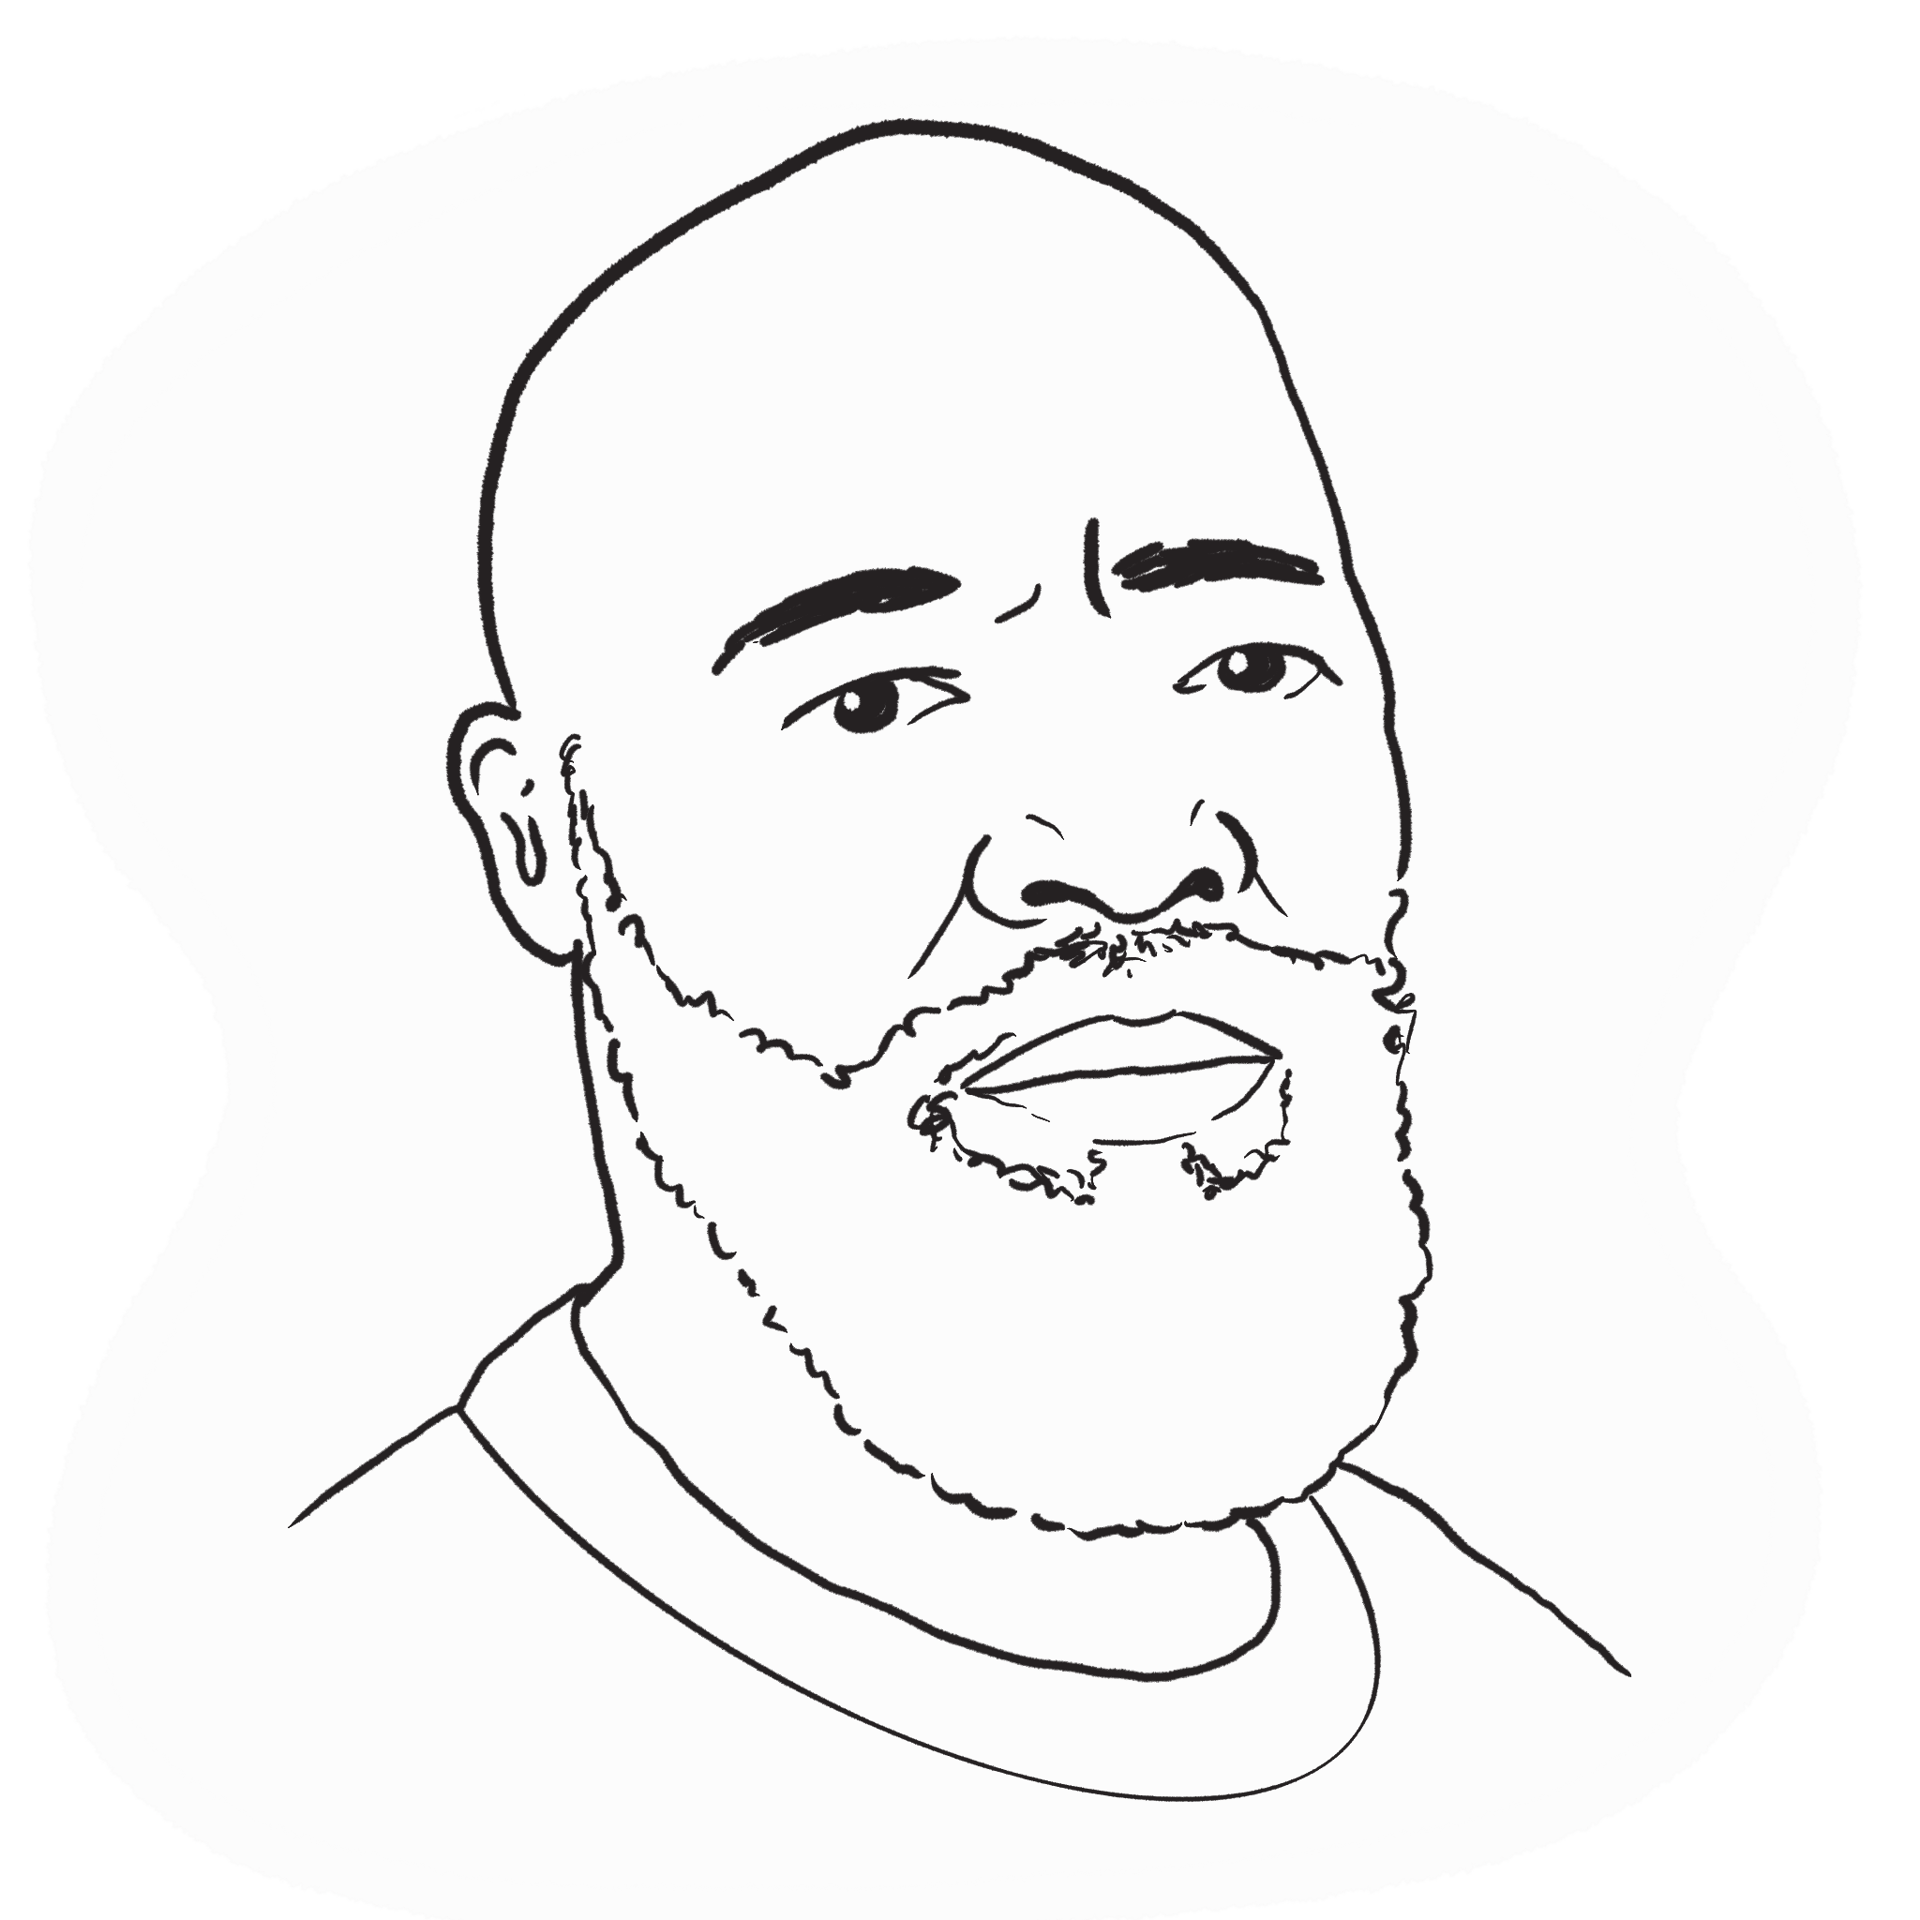 Illustration of an anonymous person - a bald man with a beard